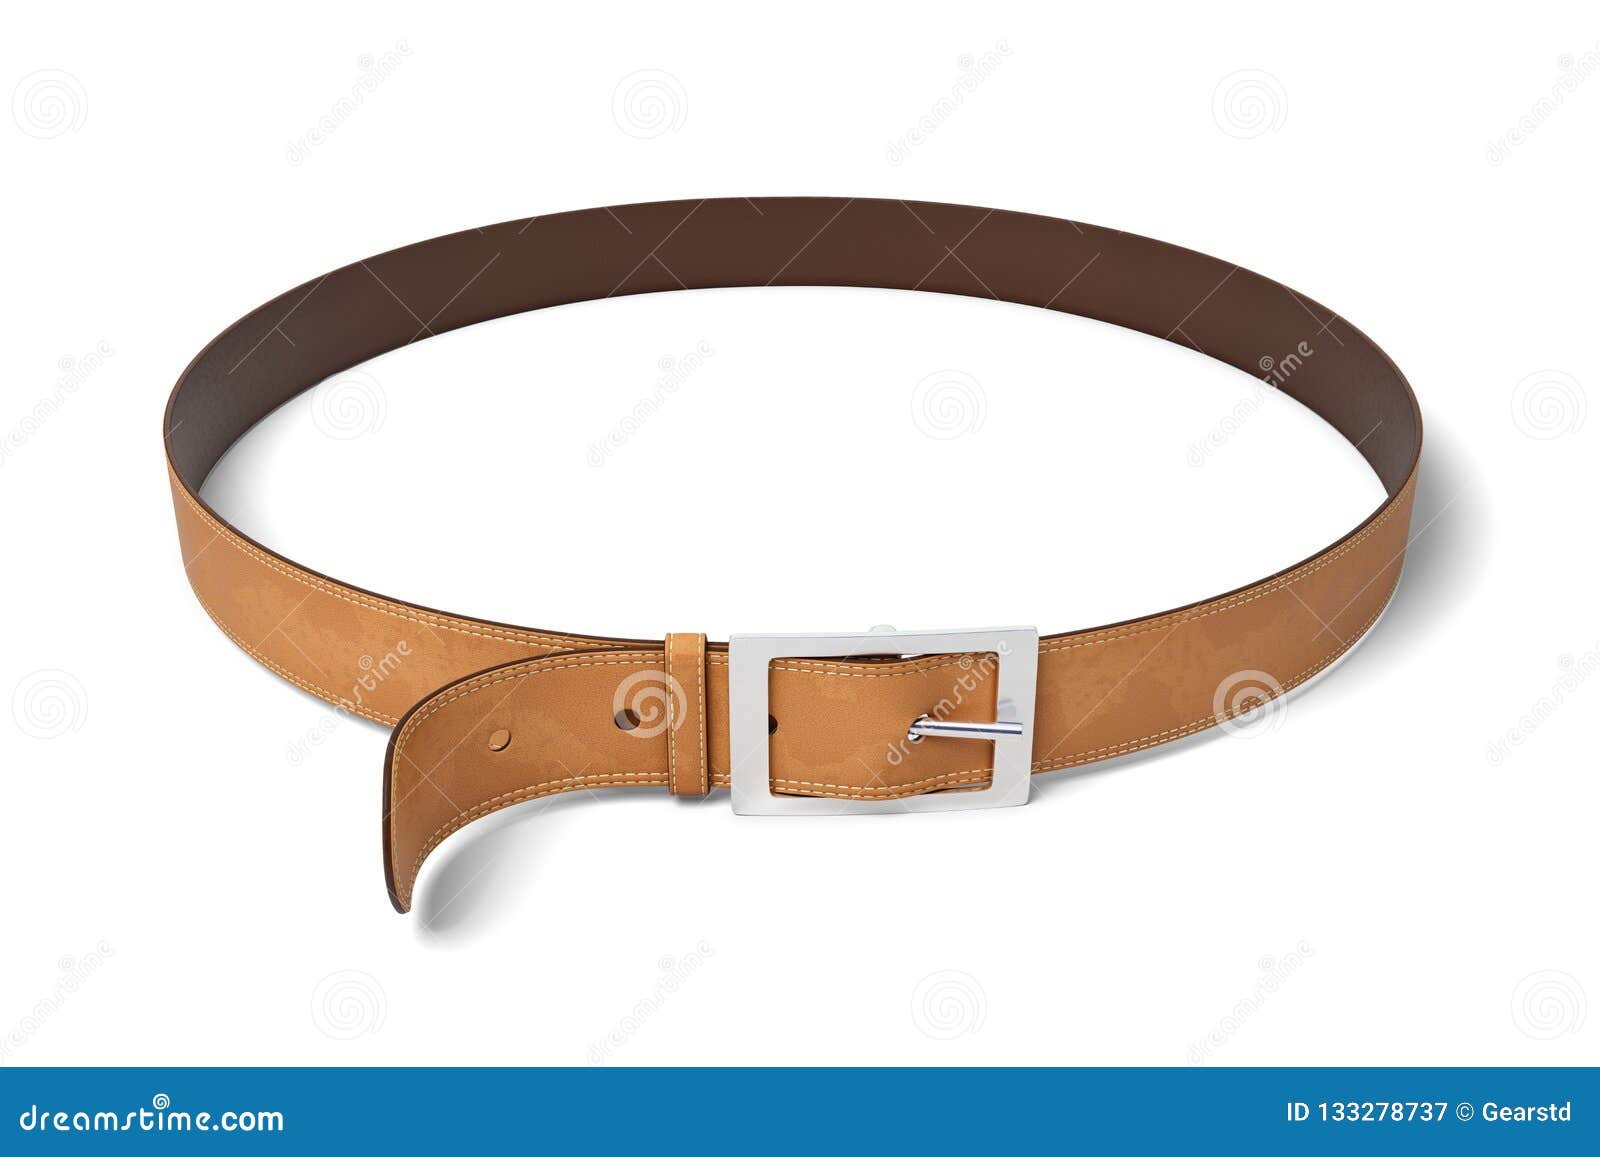 3d Rendering of Brown Leather Belt with Metal Buckle Isolated on White ...